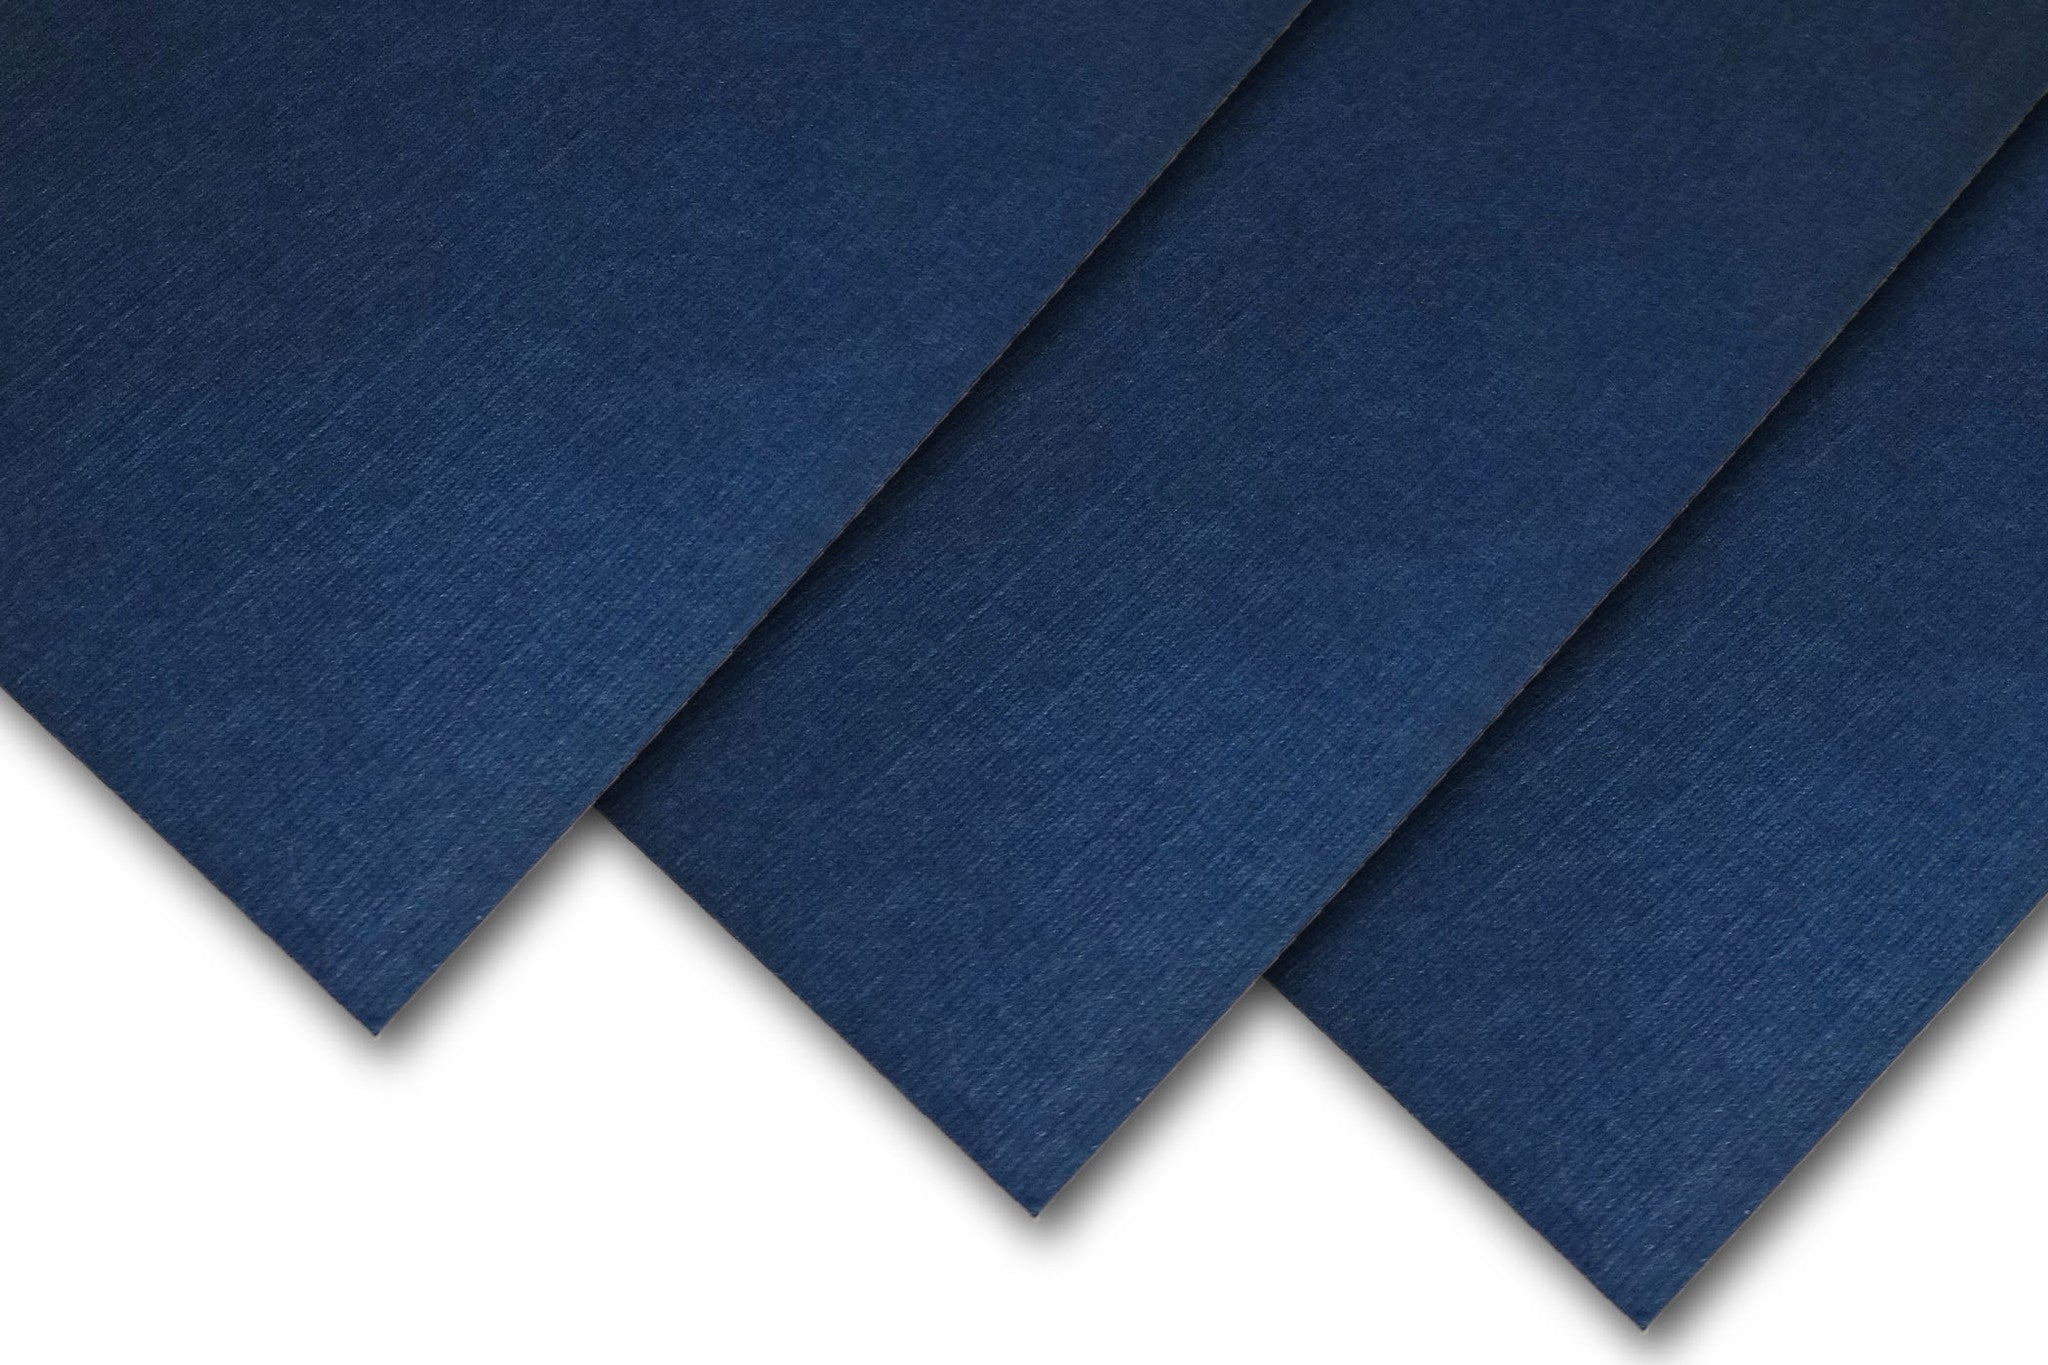 Blue Card Stock Paper: All Sizes, Premium Papers & Textures